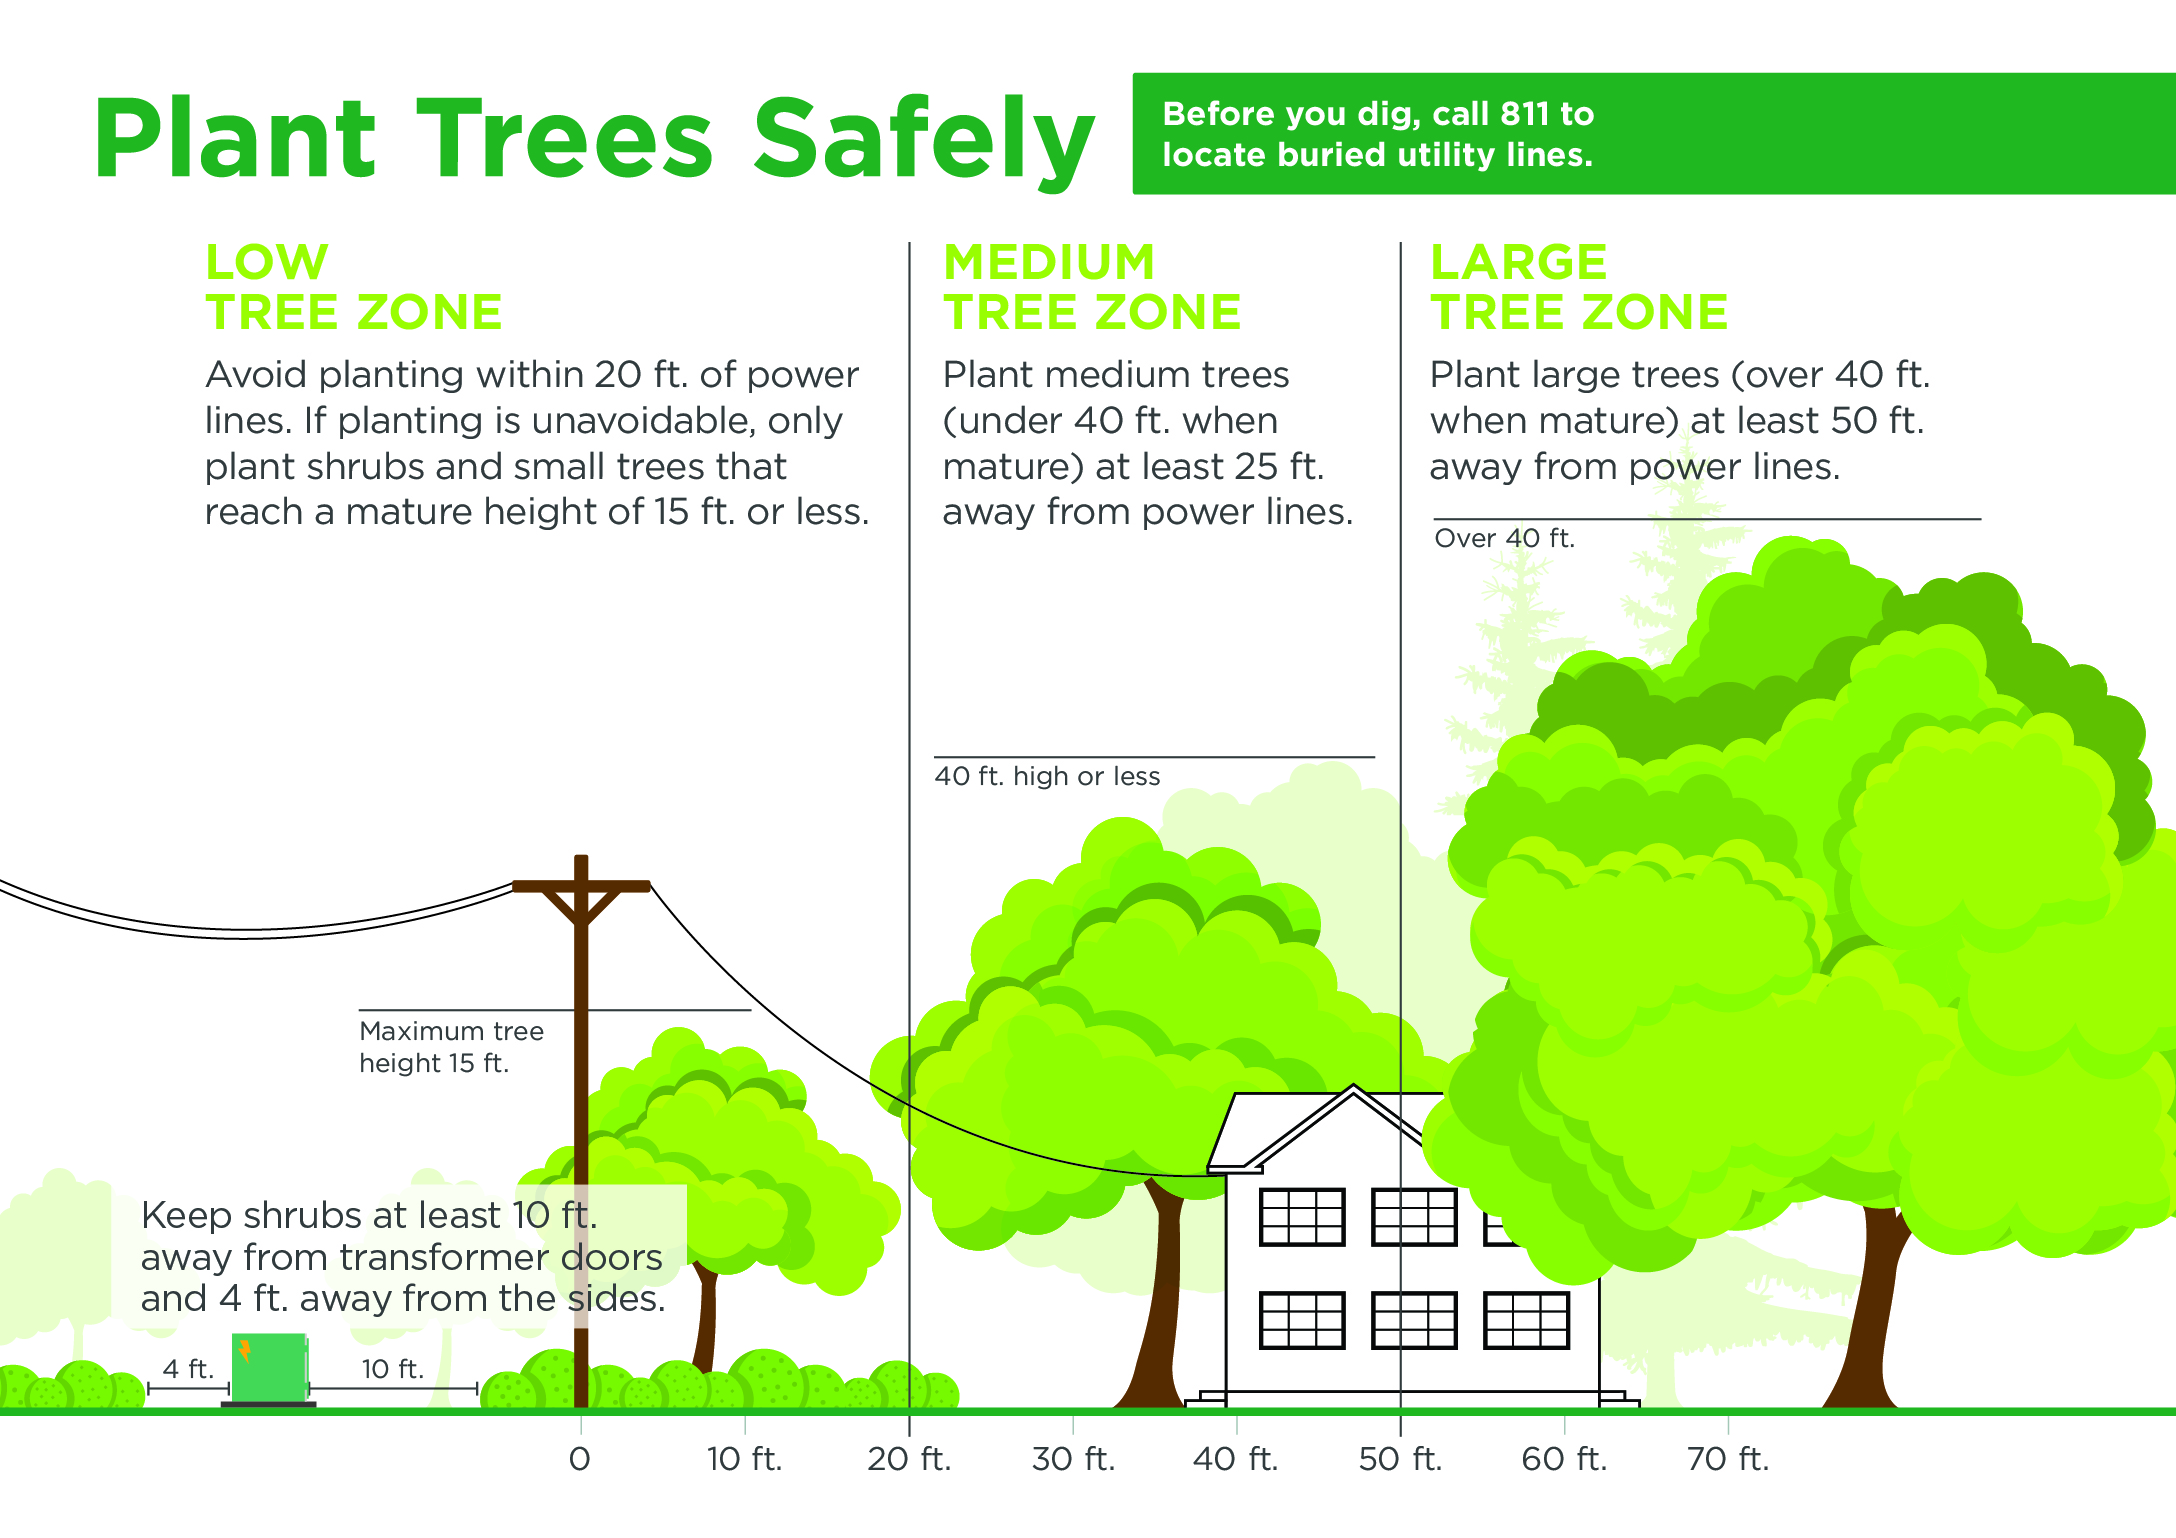 Plant Trees Safely. Before you dig, call 811 to locate buried utility lines. Low Tree Zone: Avoid planting within 20 ft. of power lines. If planting is unavoidable, only plant shrubs and small trees that reach a mature height of 15 ft. or less. Medium Tree Zone: Plant medium trees (under 40 ft. when mature) at least 25 ft. away from power lines. Large Tree Zone: Plant large trees (over 40 ft. when mature) at least 50 ft. away from power lines. Keep shrubs at least 10 ft. away from transformer doors and 4 ft. away from the sides.